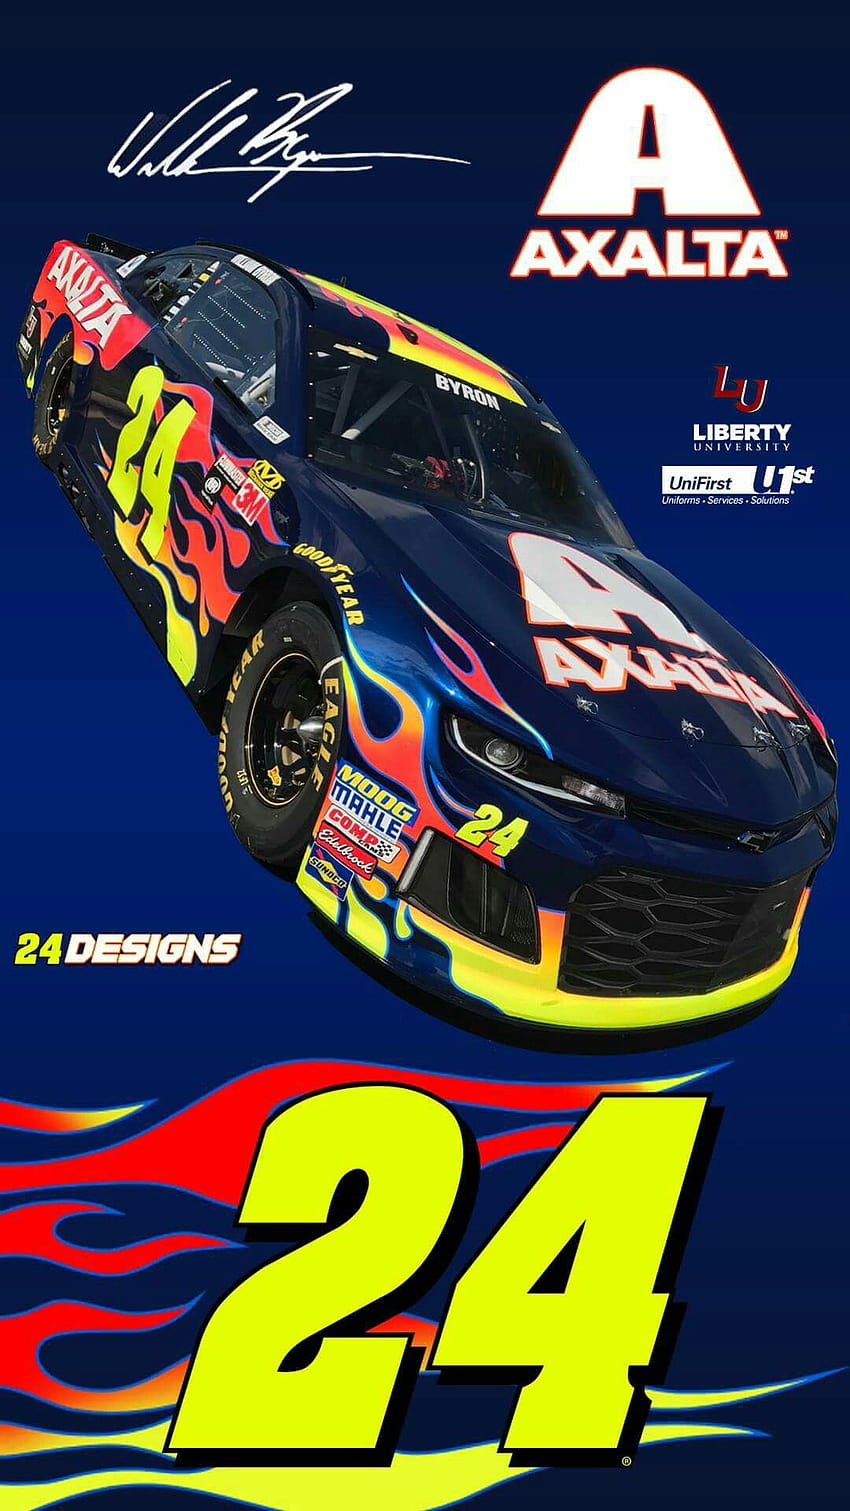 NASCAR Wallpapers on X William Byron 2014 pts Byron won the third race  of the season at Homestead He went on a top10 streak after but has been  in a bit of